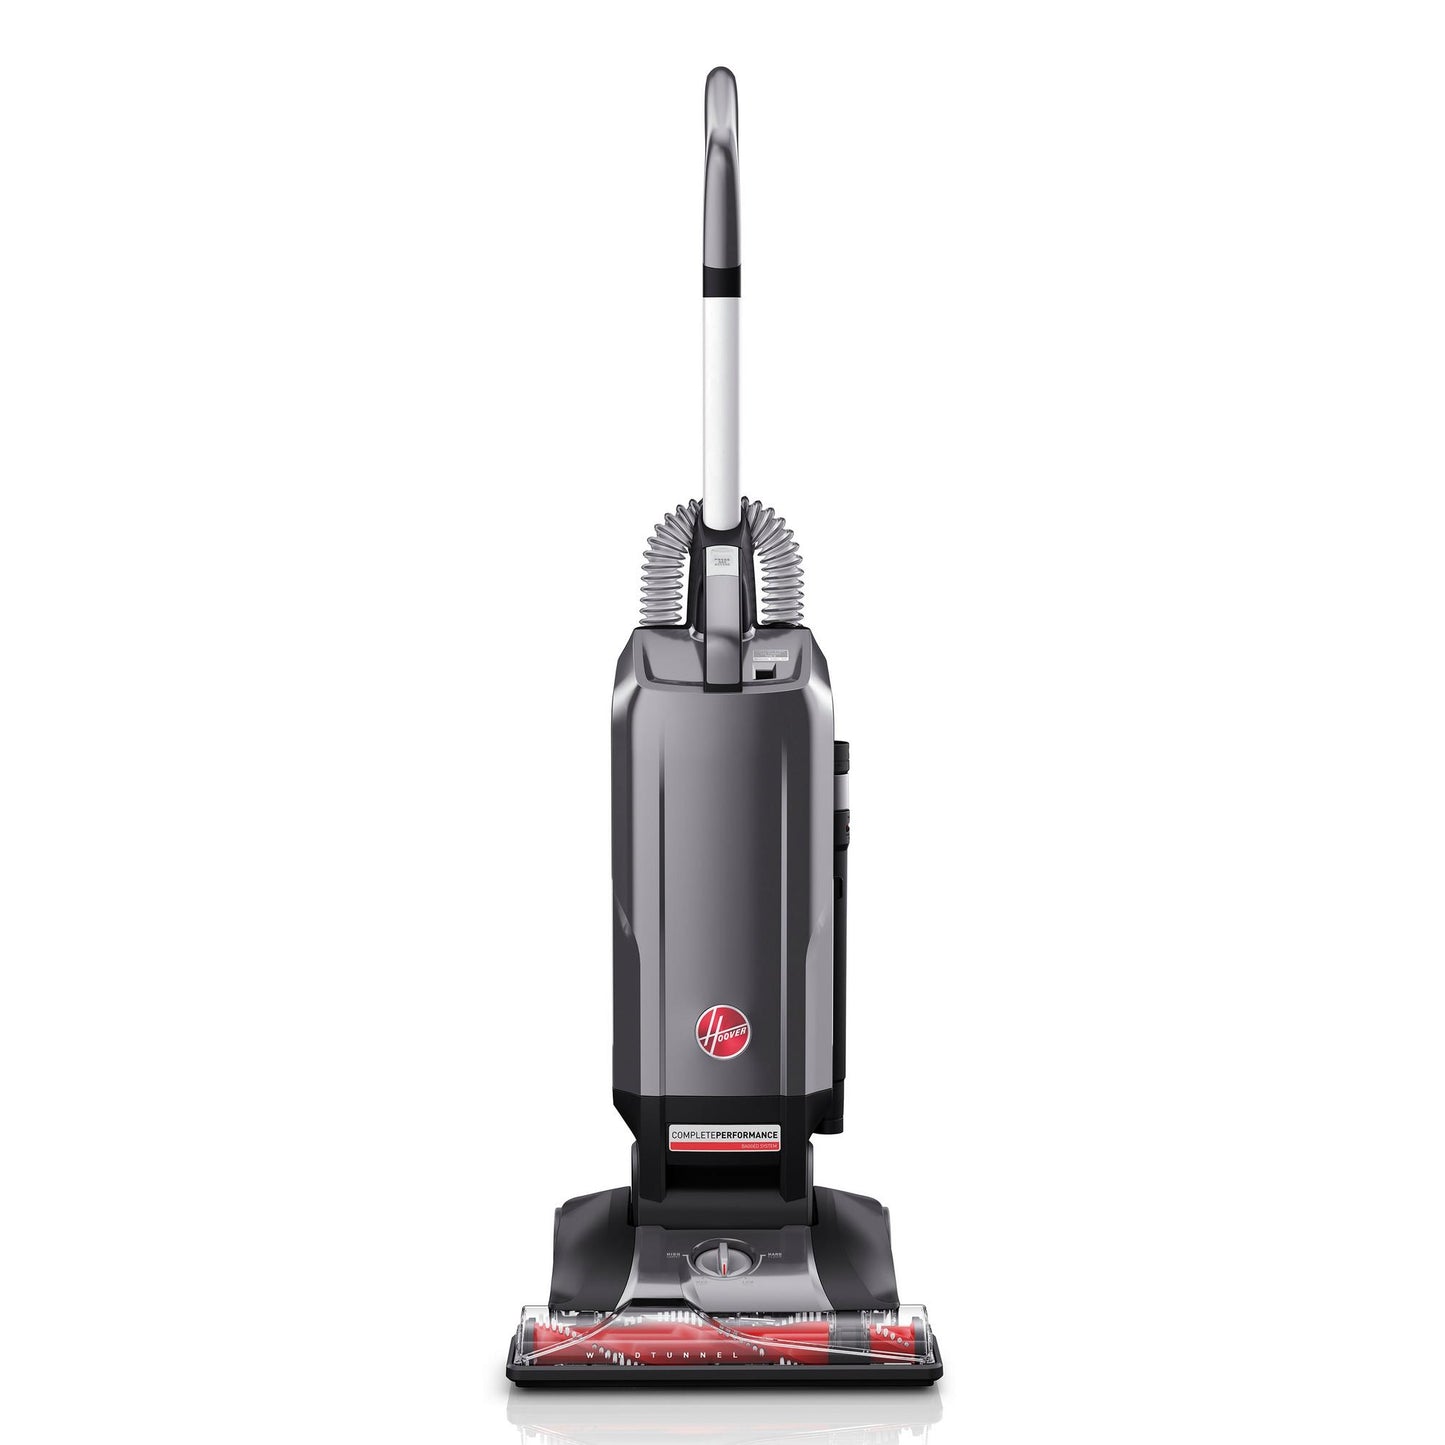 Complete Performance Advanced Bagged Upright Vacuum with 30 ft Cord